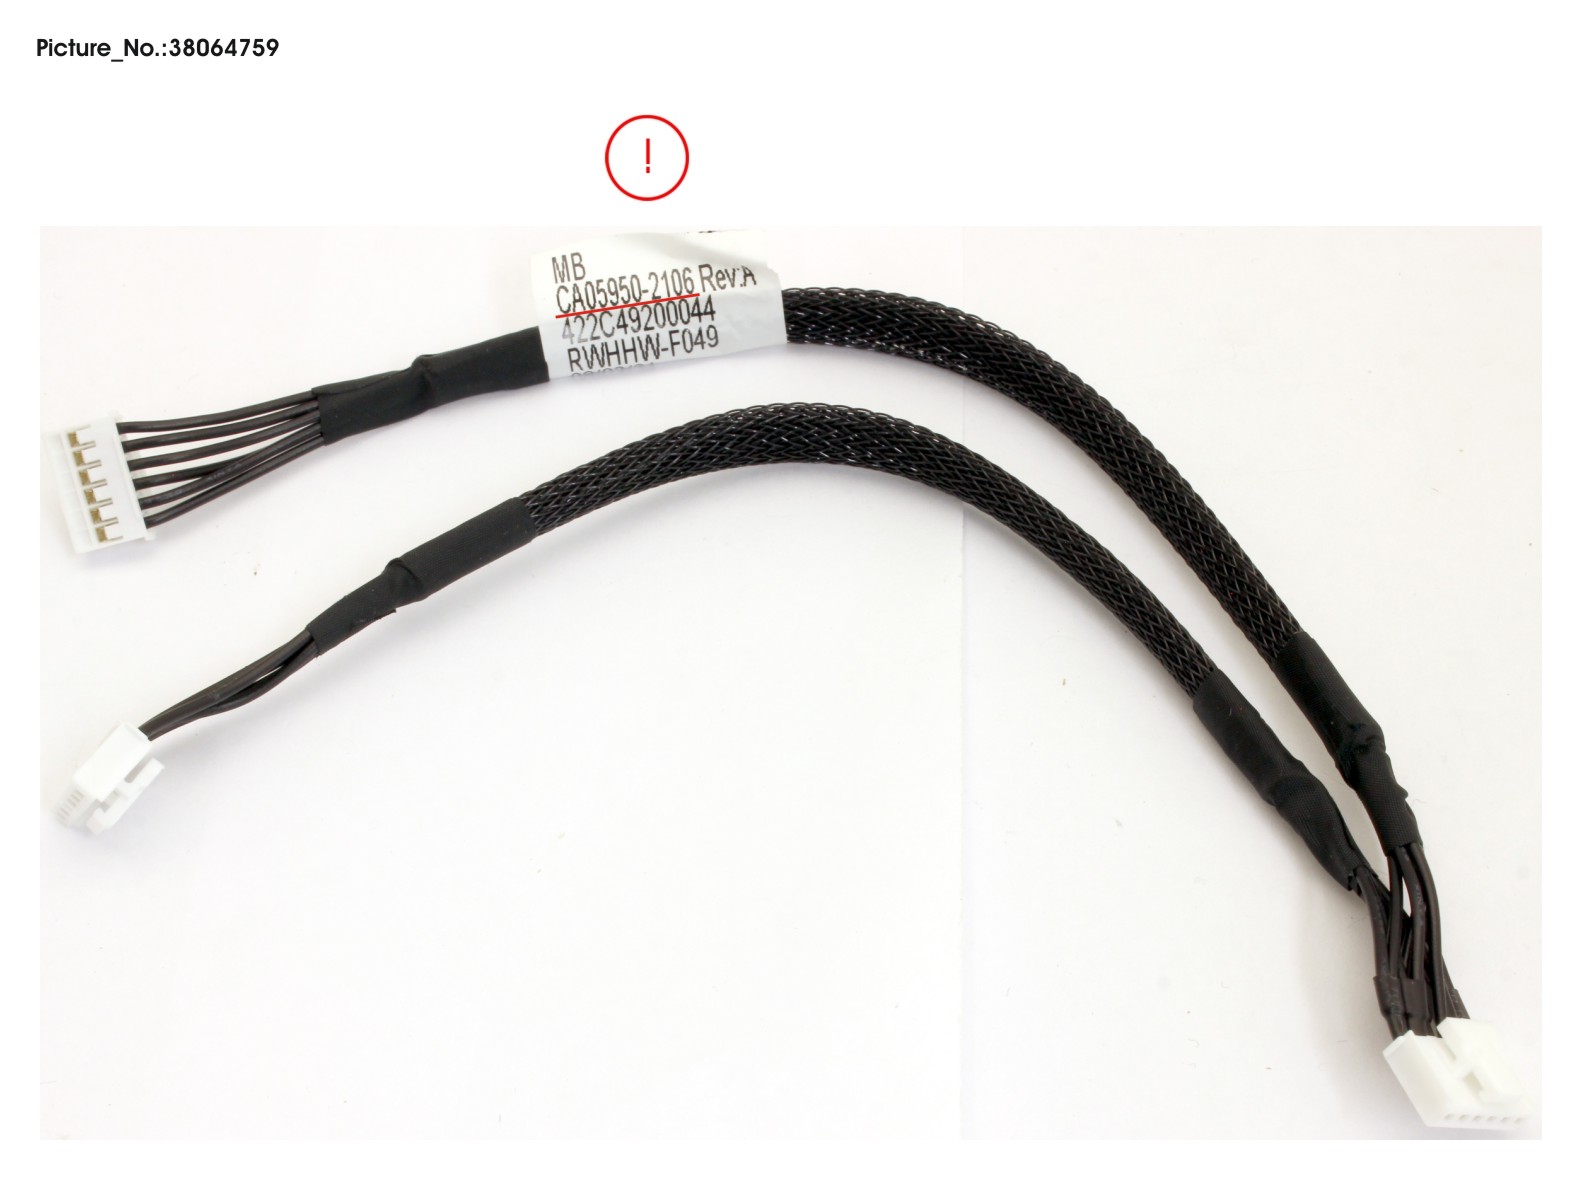 OOB 16X2.5 BP SIGNAL CABLE(MB TO 16X2.5